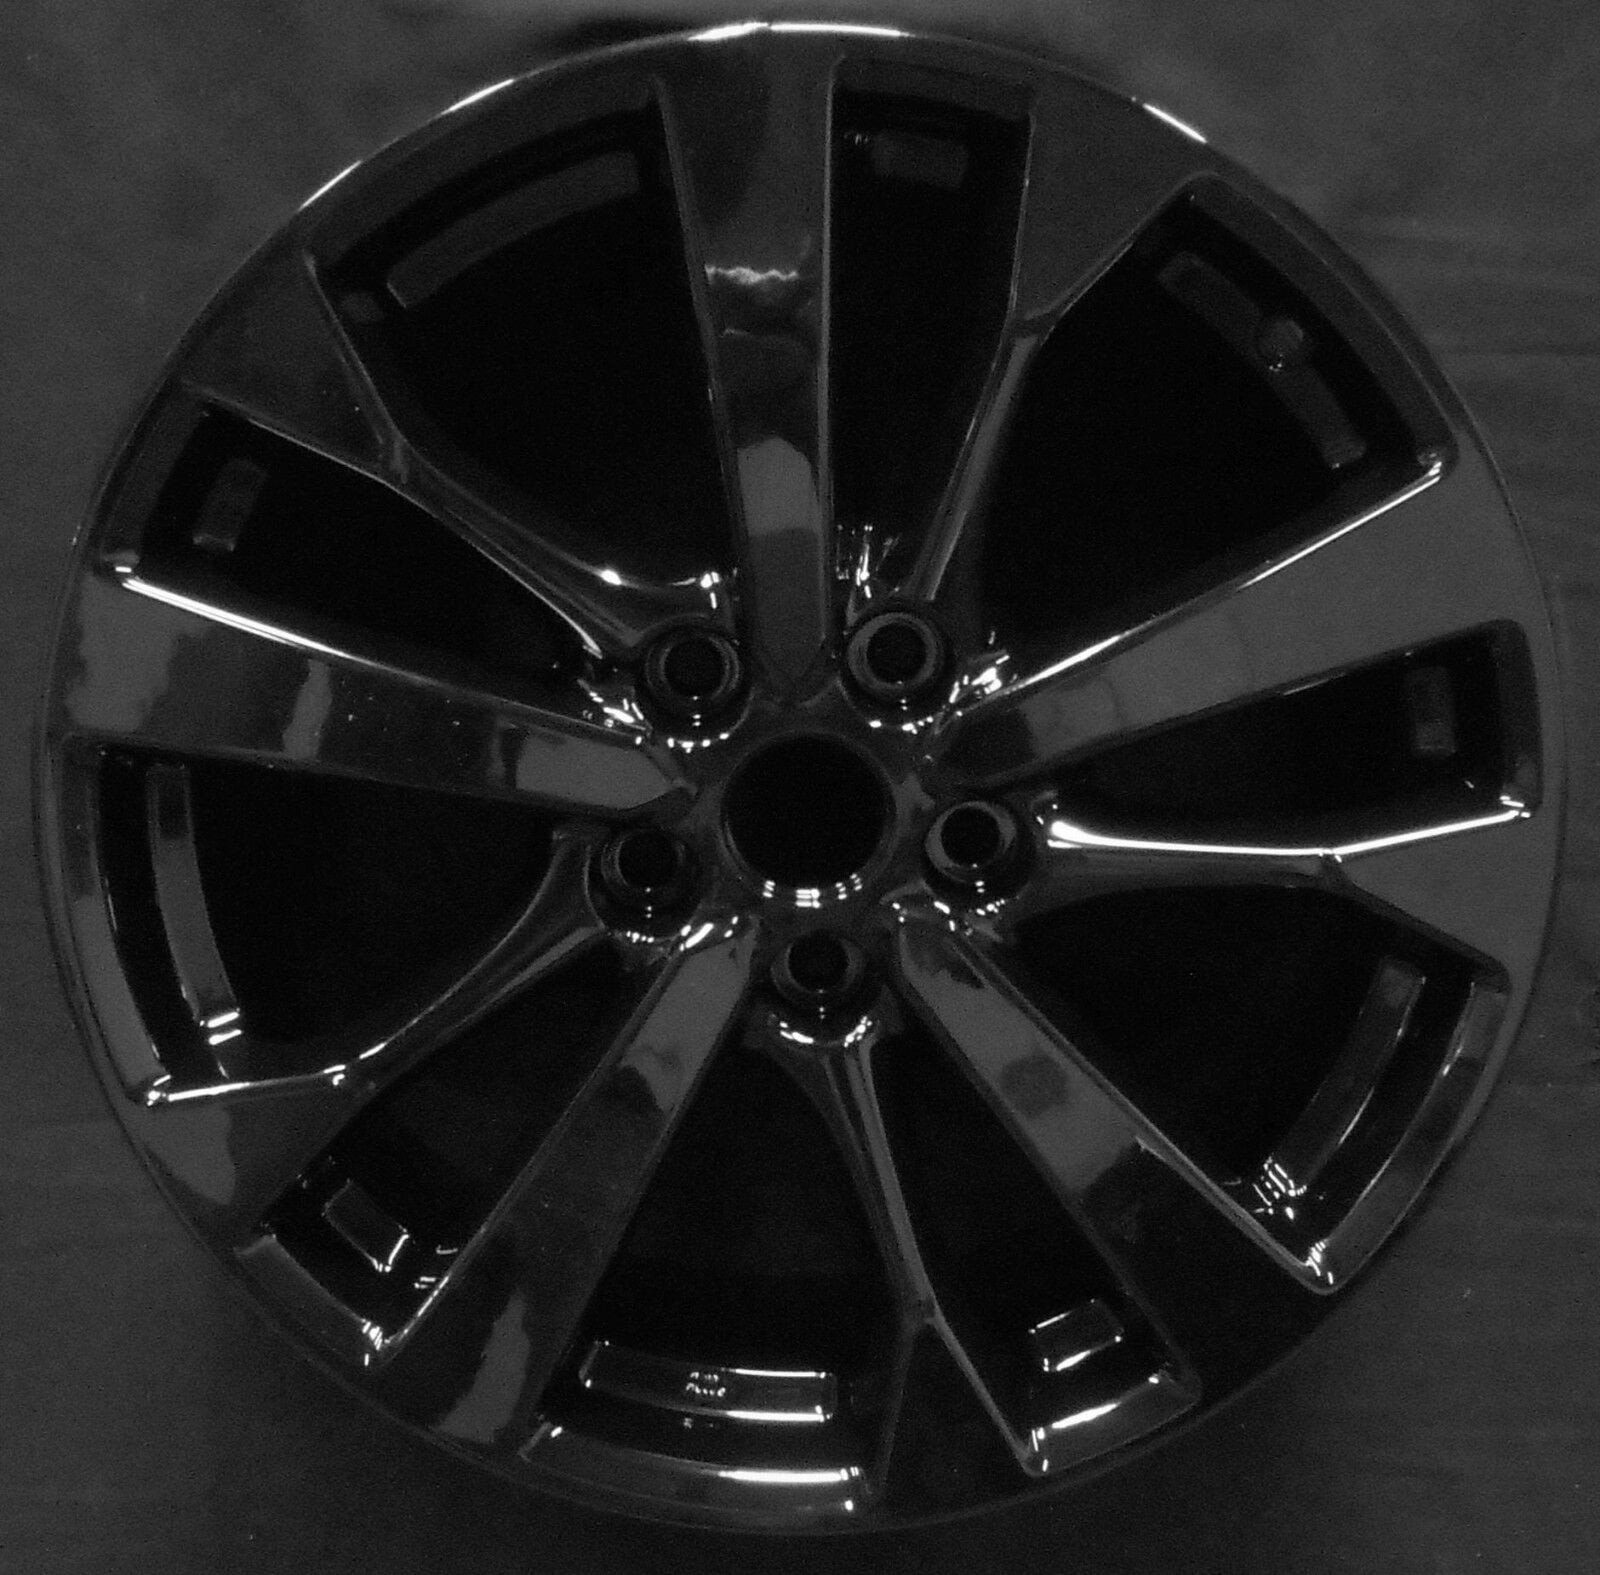 New 18" Alloy Replacement Wheel for Nissan Altima 2016 2017 2018 Rim 62720